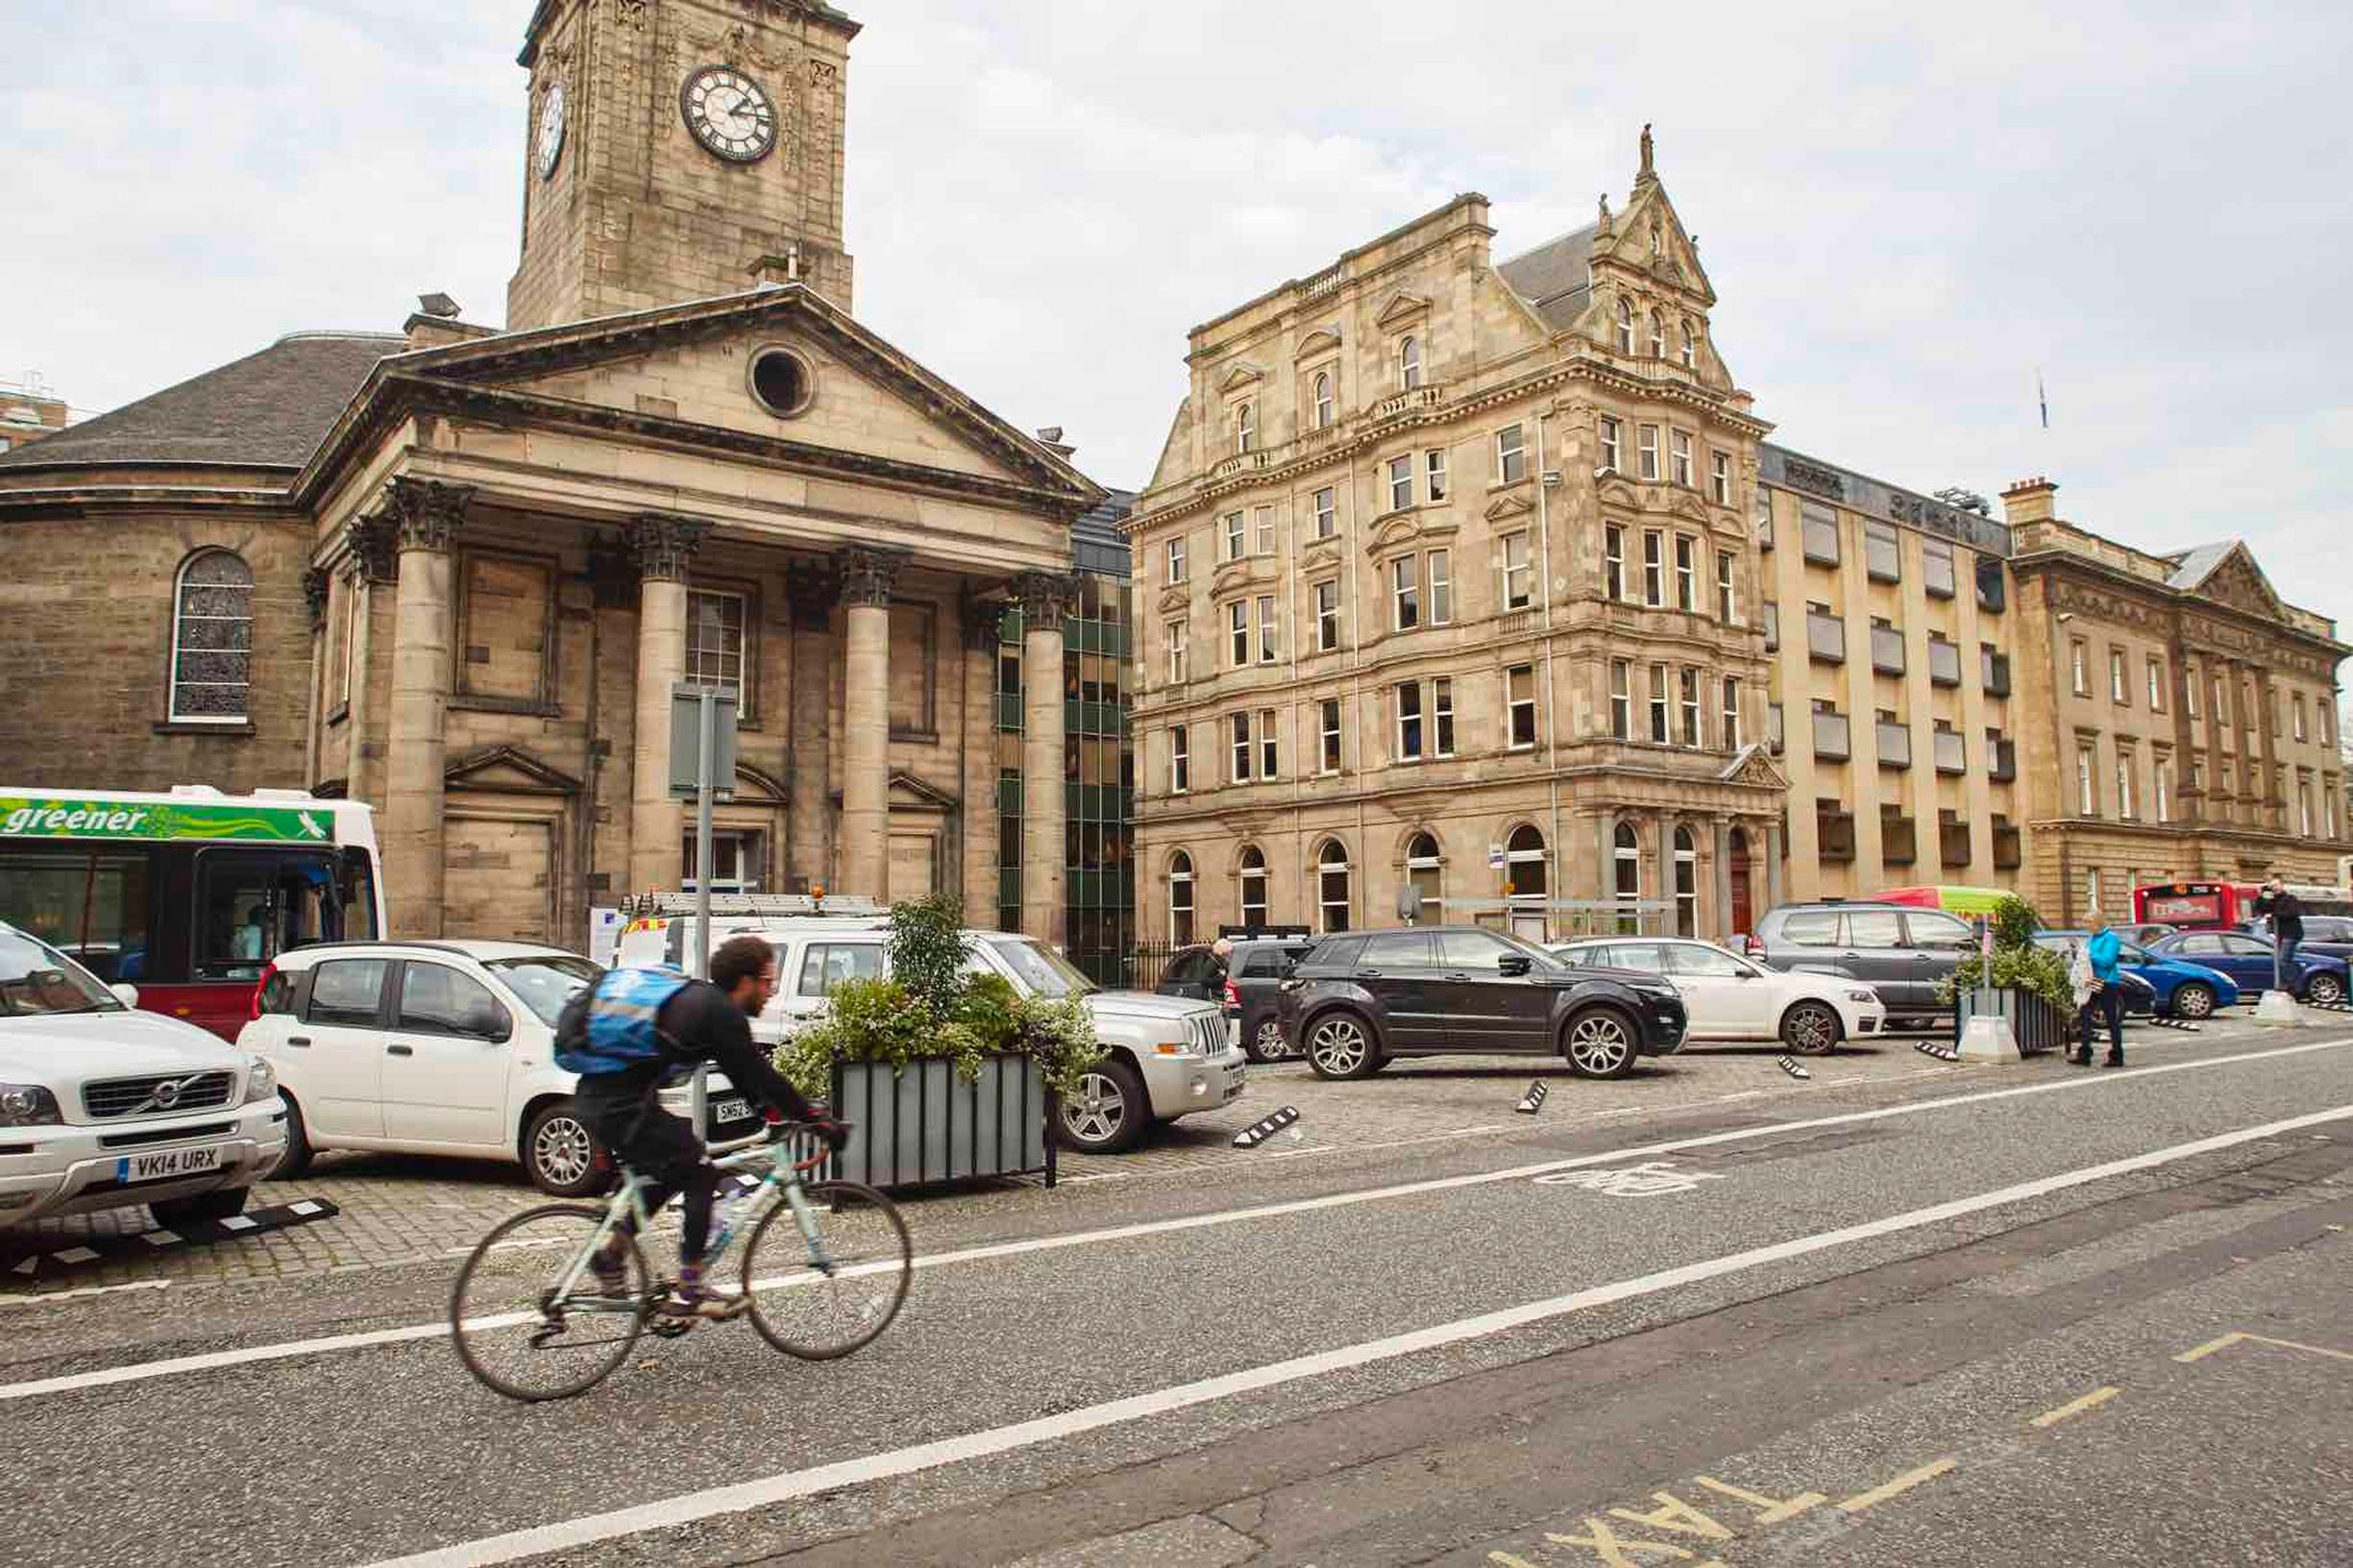 A host of measures including new cycle ways are helping to improve air quality in Edinburgh, says the city council